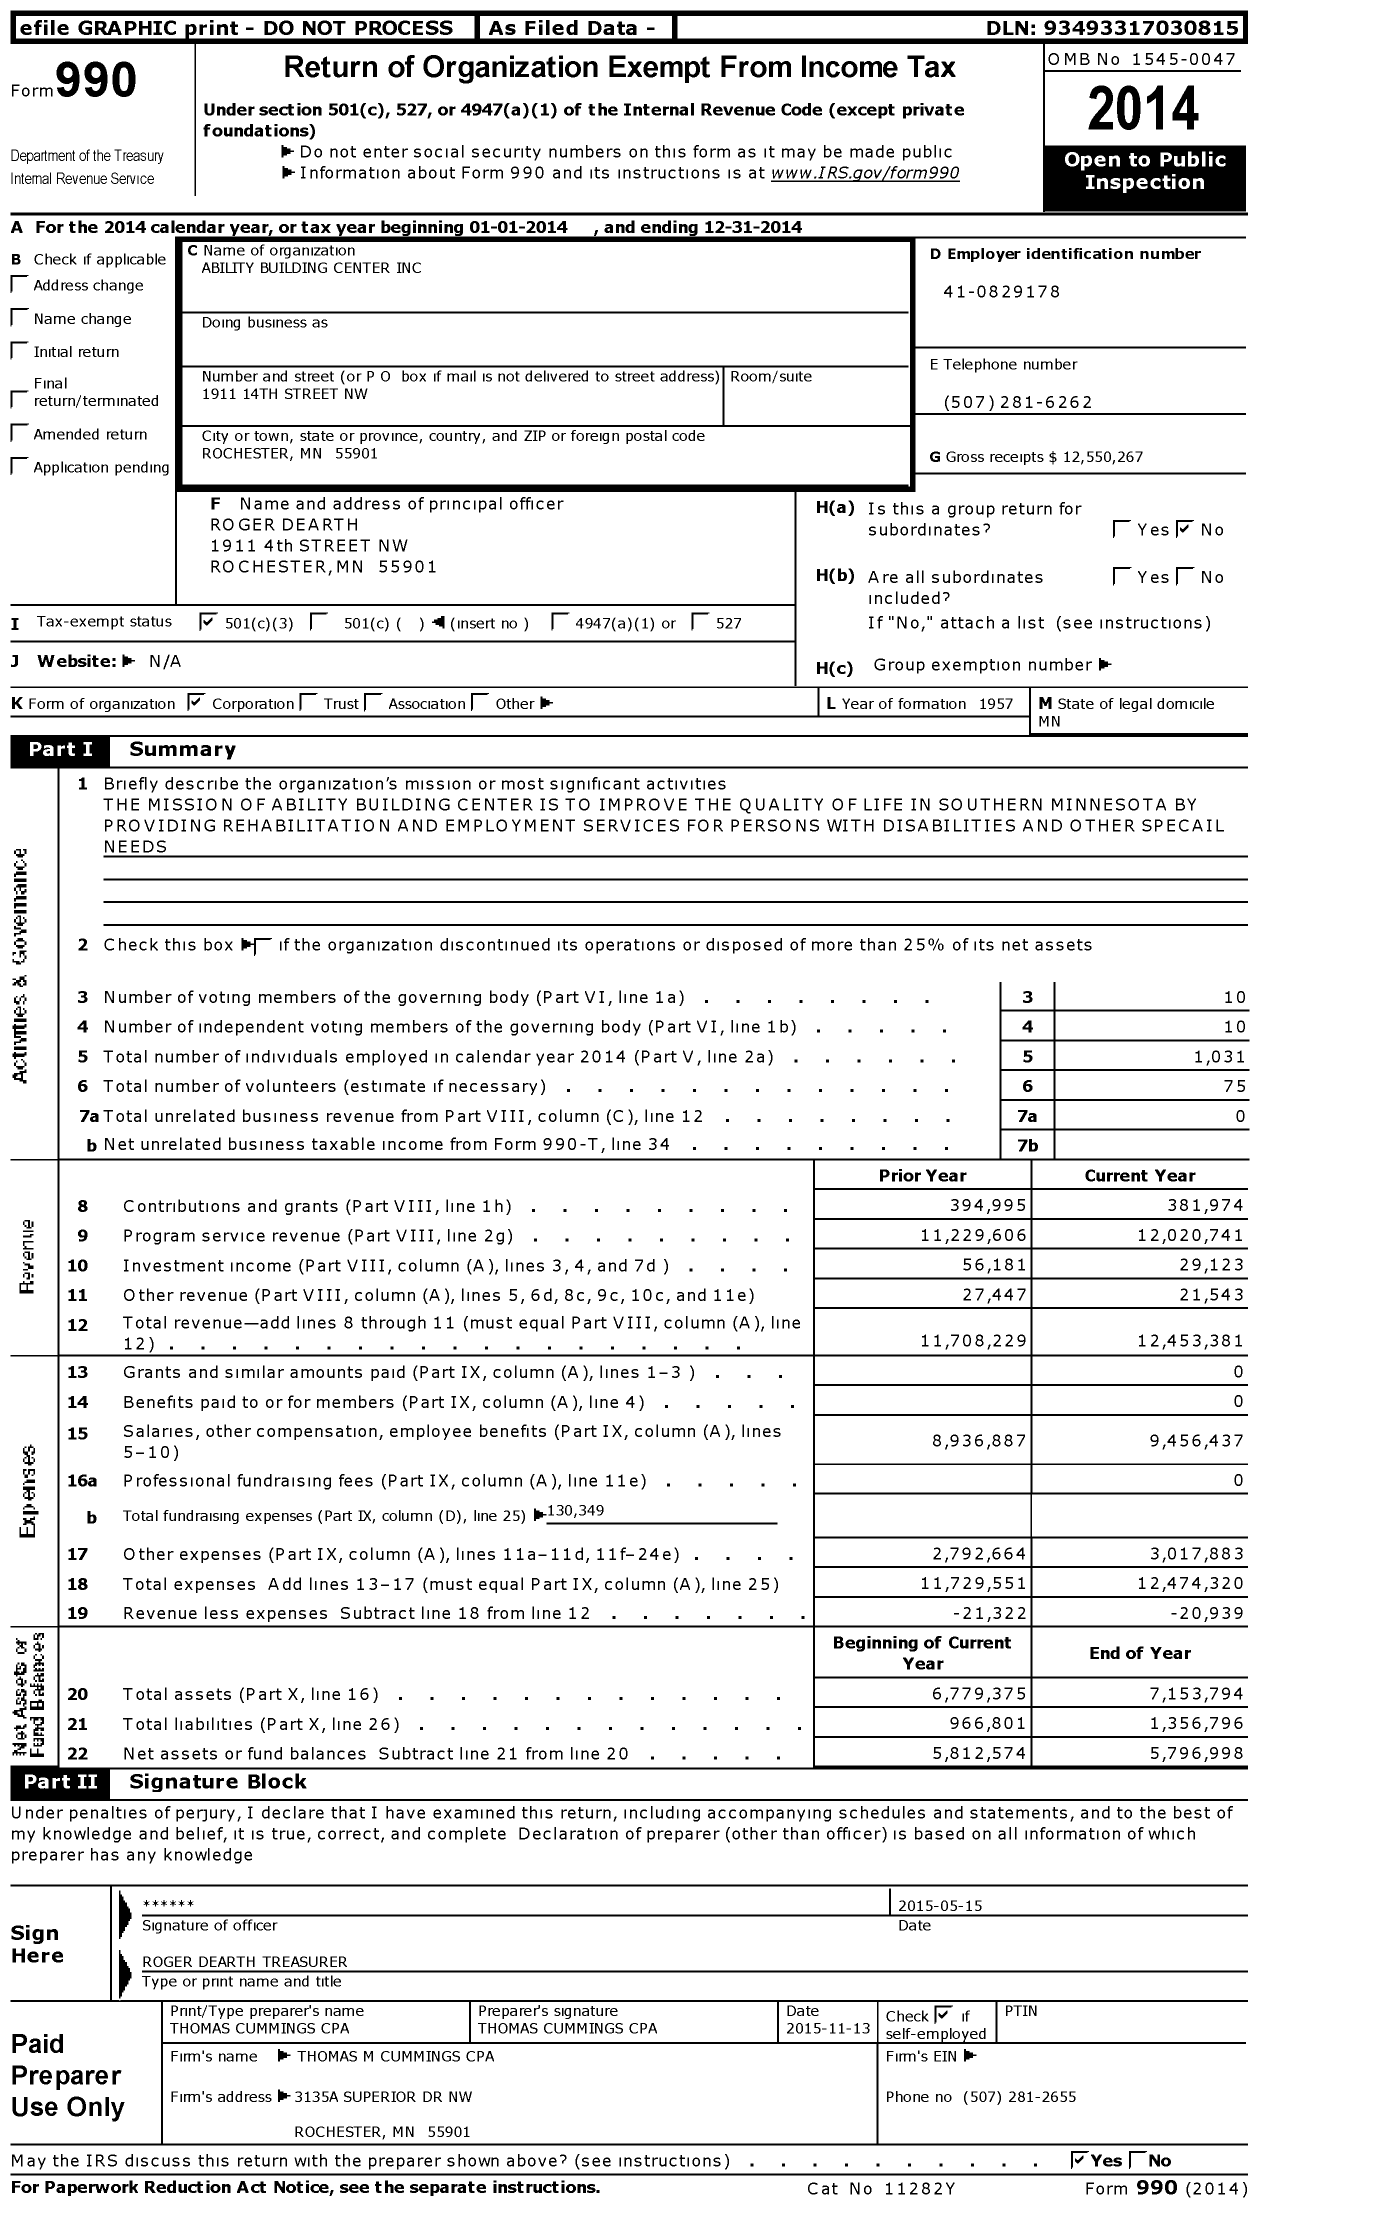 Image of first page of 2014 Form 990 for Ability Building Center (ABC)